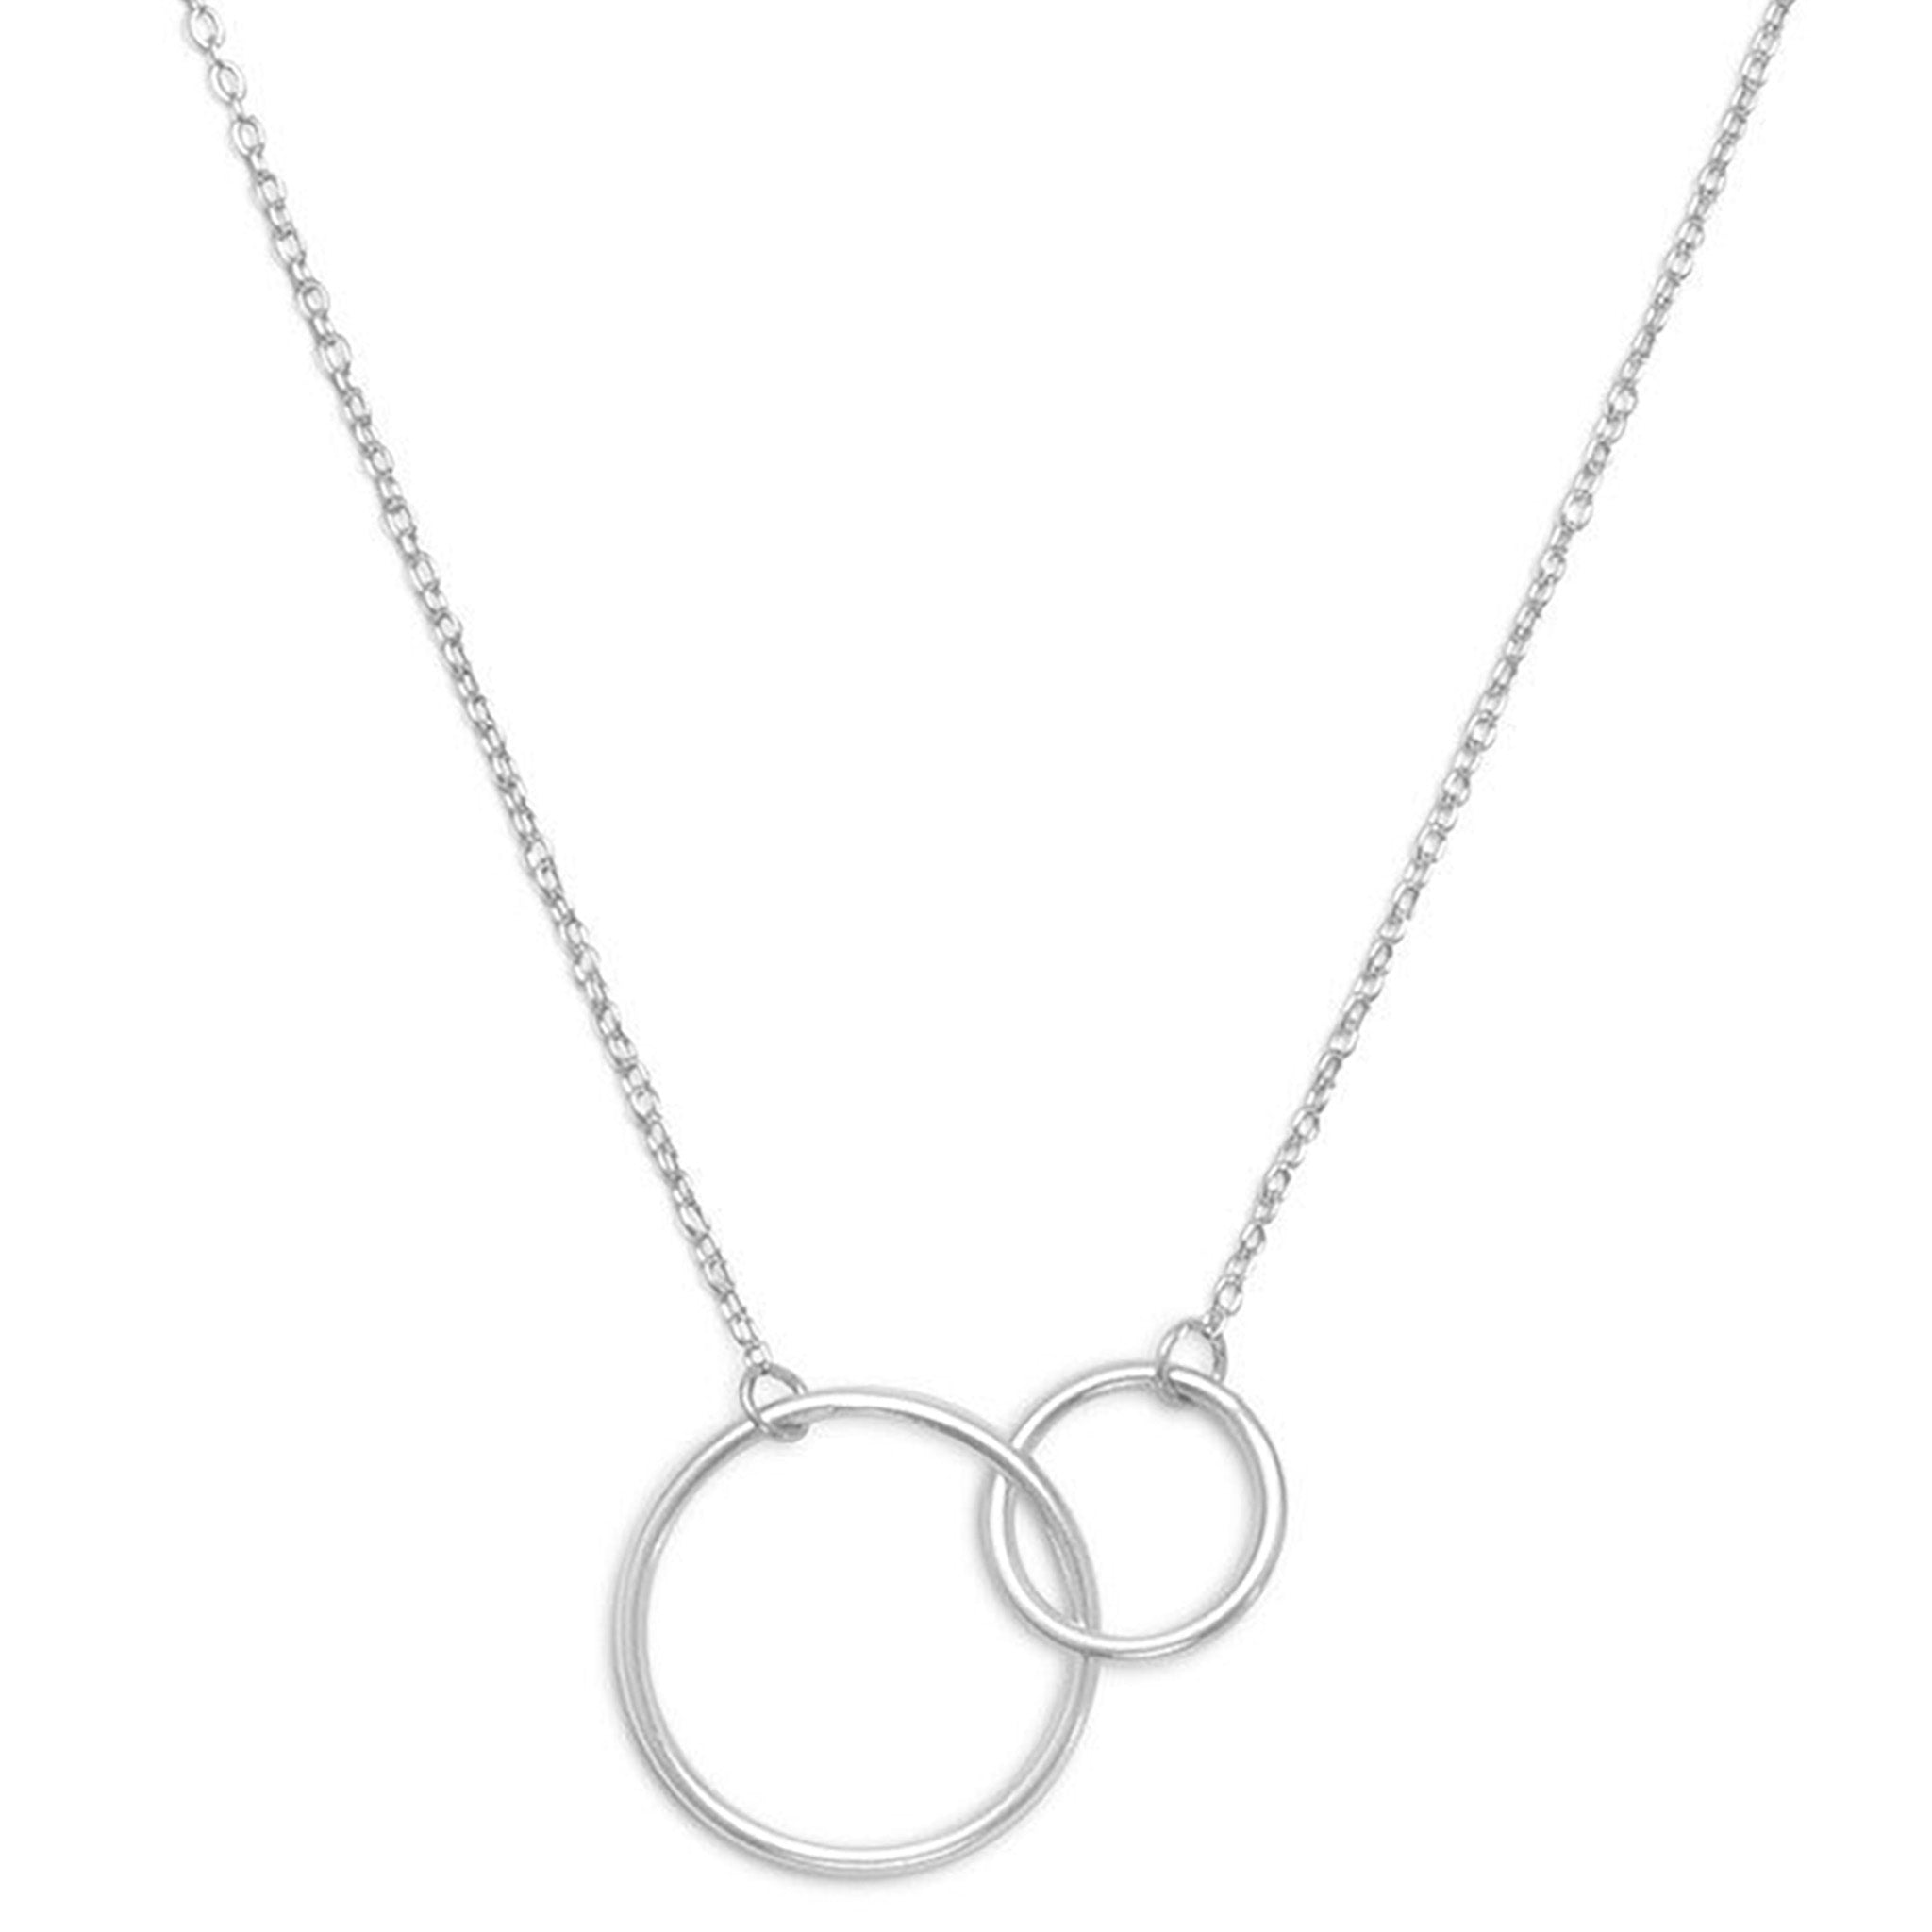 Double Ring Linked Necklace